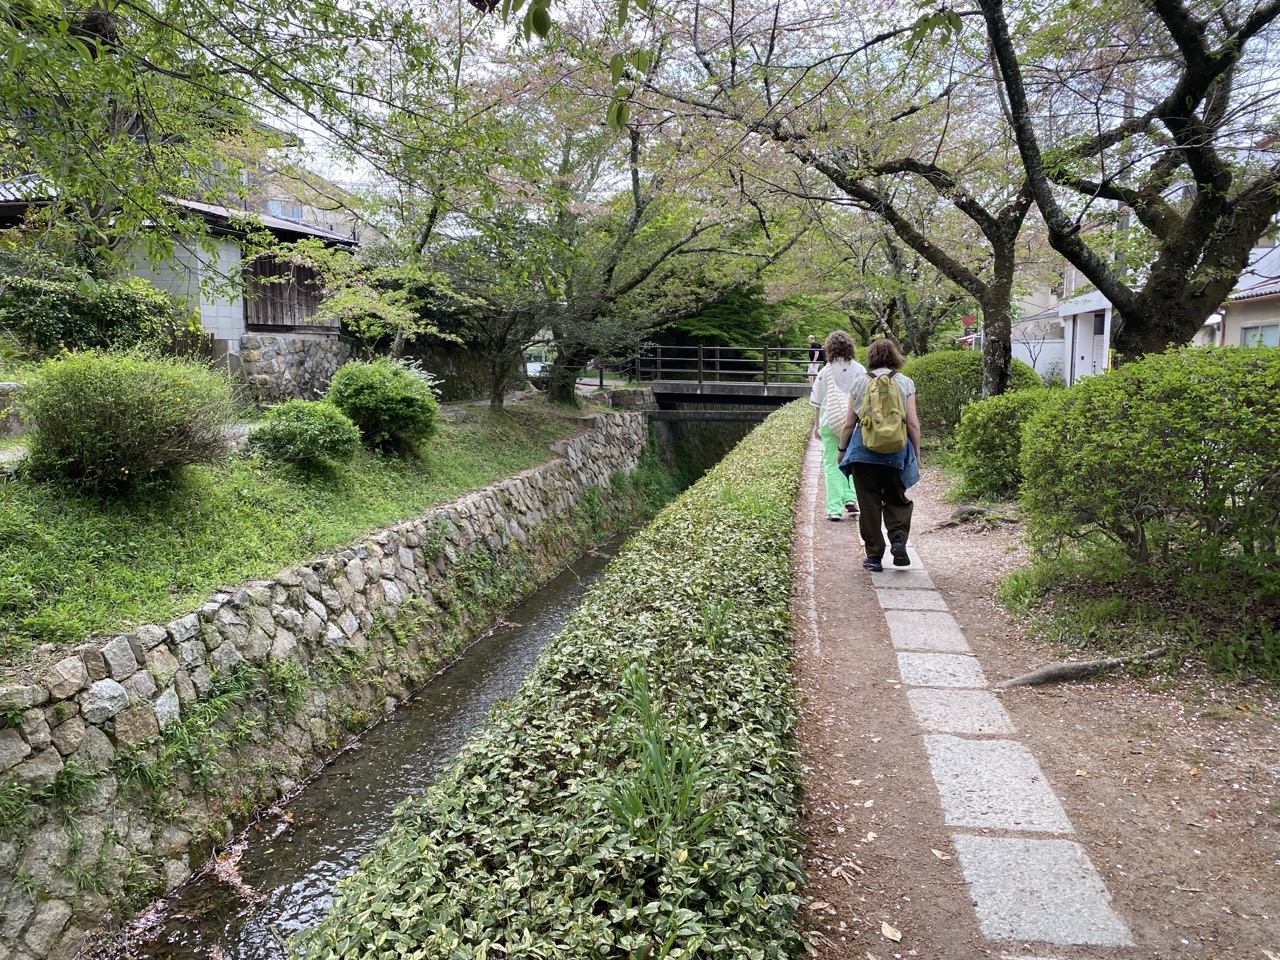 The Philosophers Walk in Kyoto. A green path by a river, with cherry blossoms